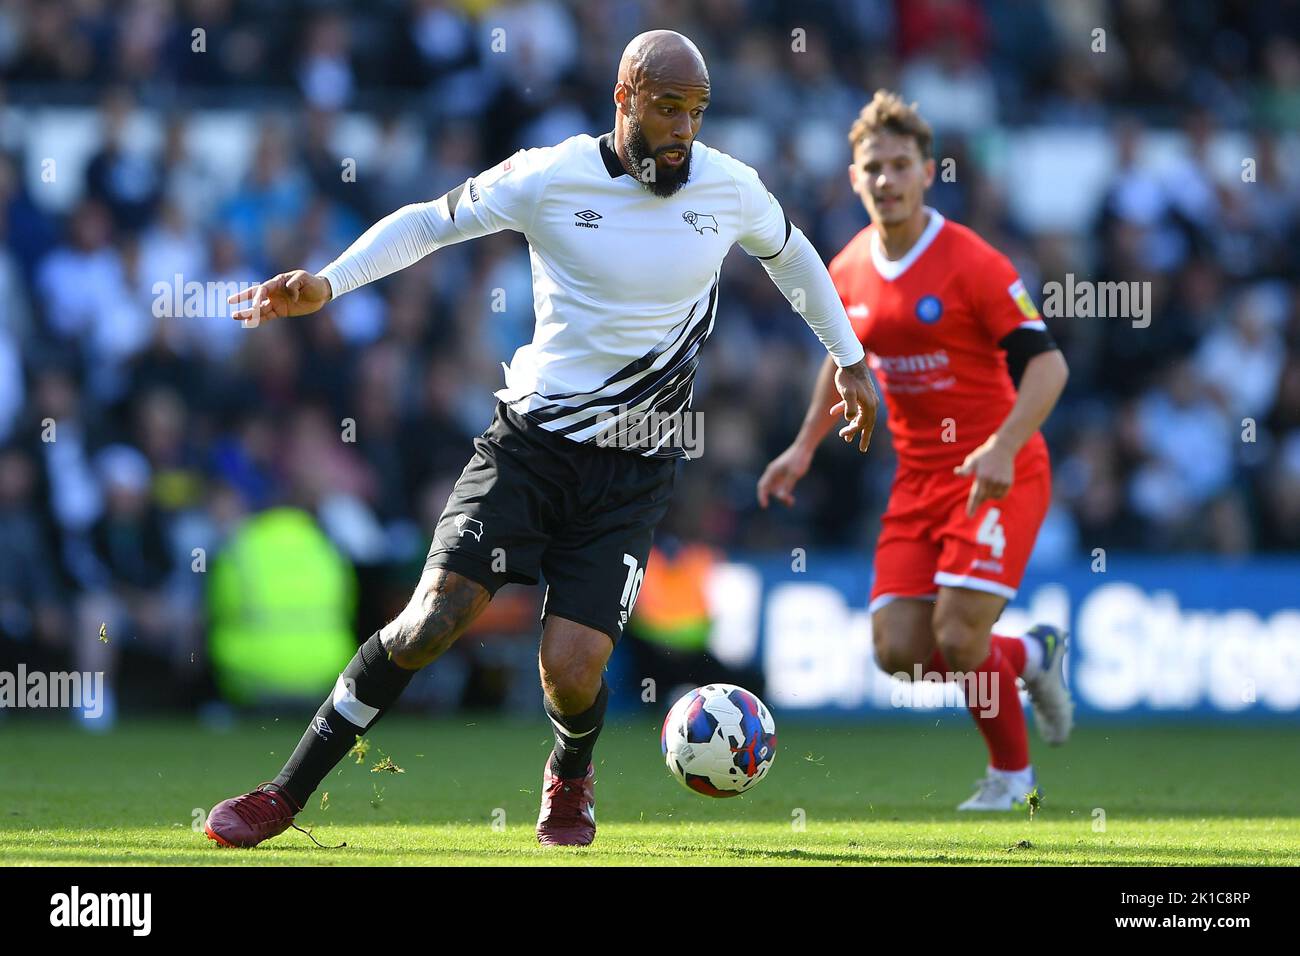 David McGoldrick of Derby County in action during the Sky Bet League 1 match between Derby County and Wycombe Wanderers at Pride Park, Derby on Saturday 17th September 2022. Stock Photo